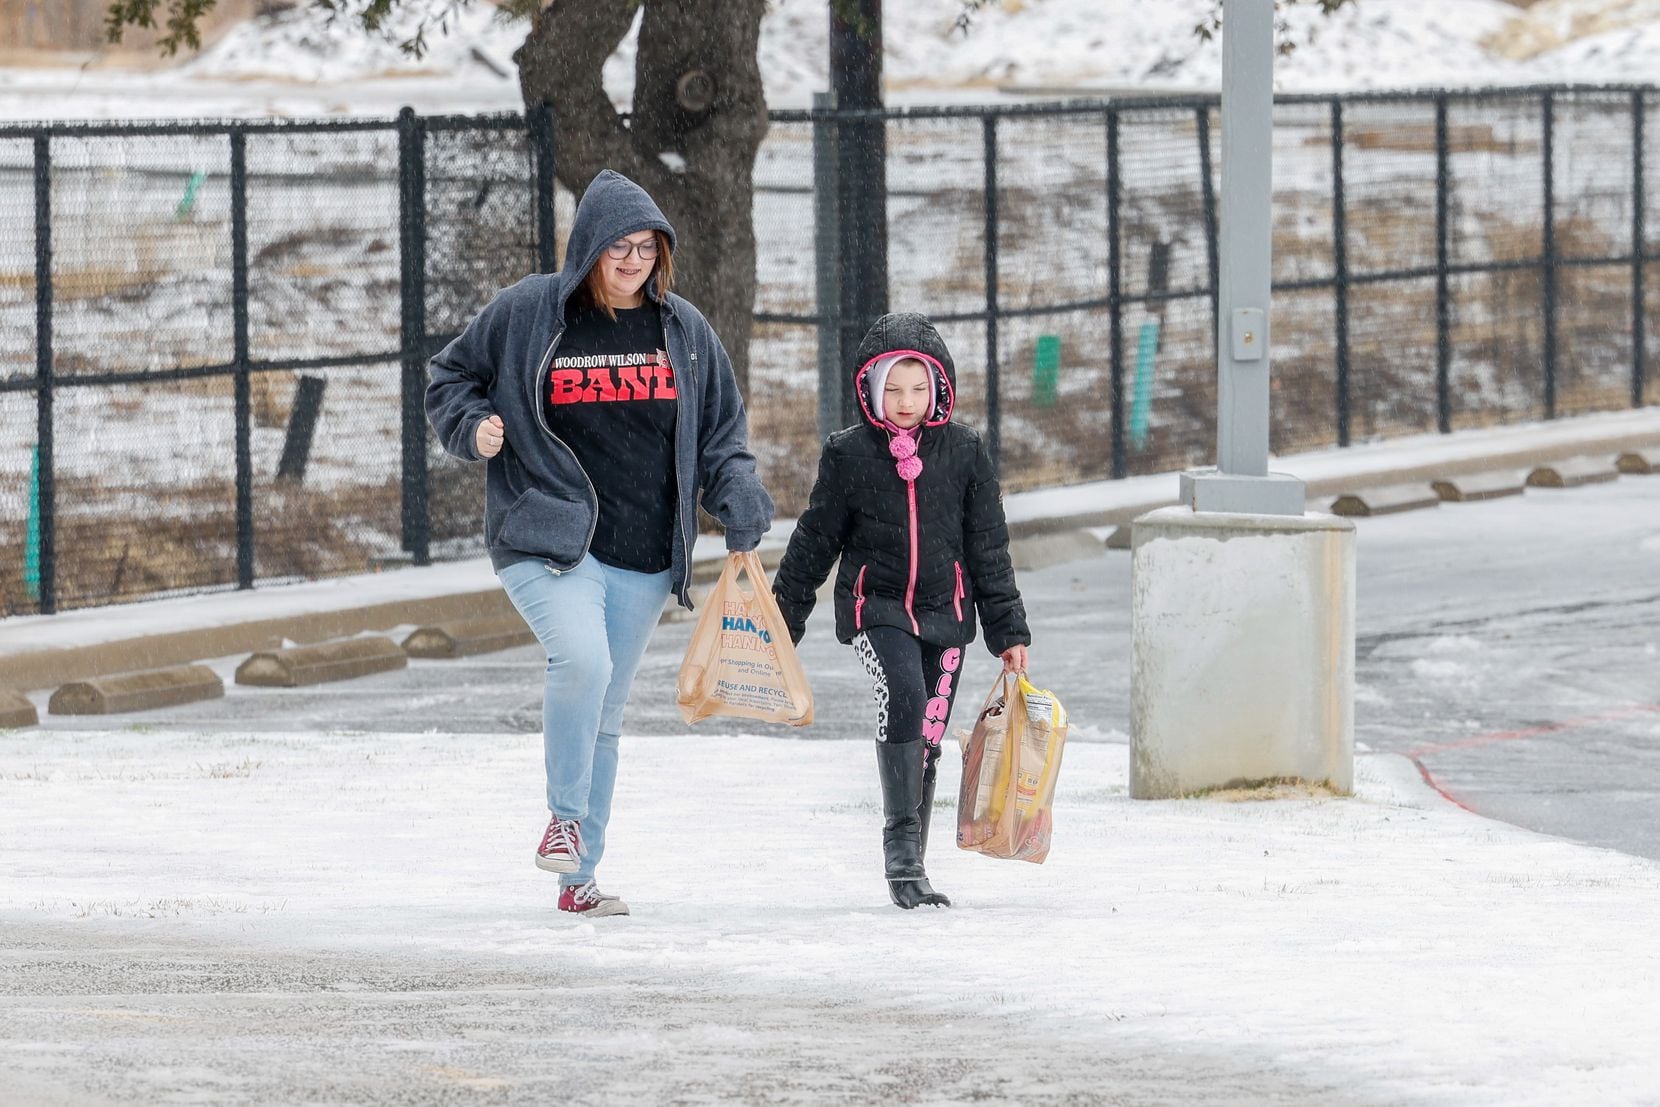 Teagan McDowell, 16, and Rebekkah Andrews, 8, play together as they walk after getting some...